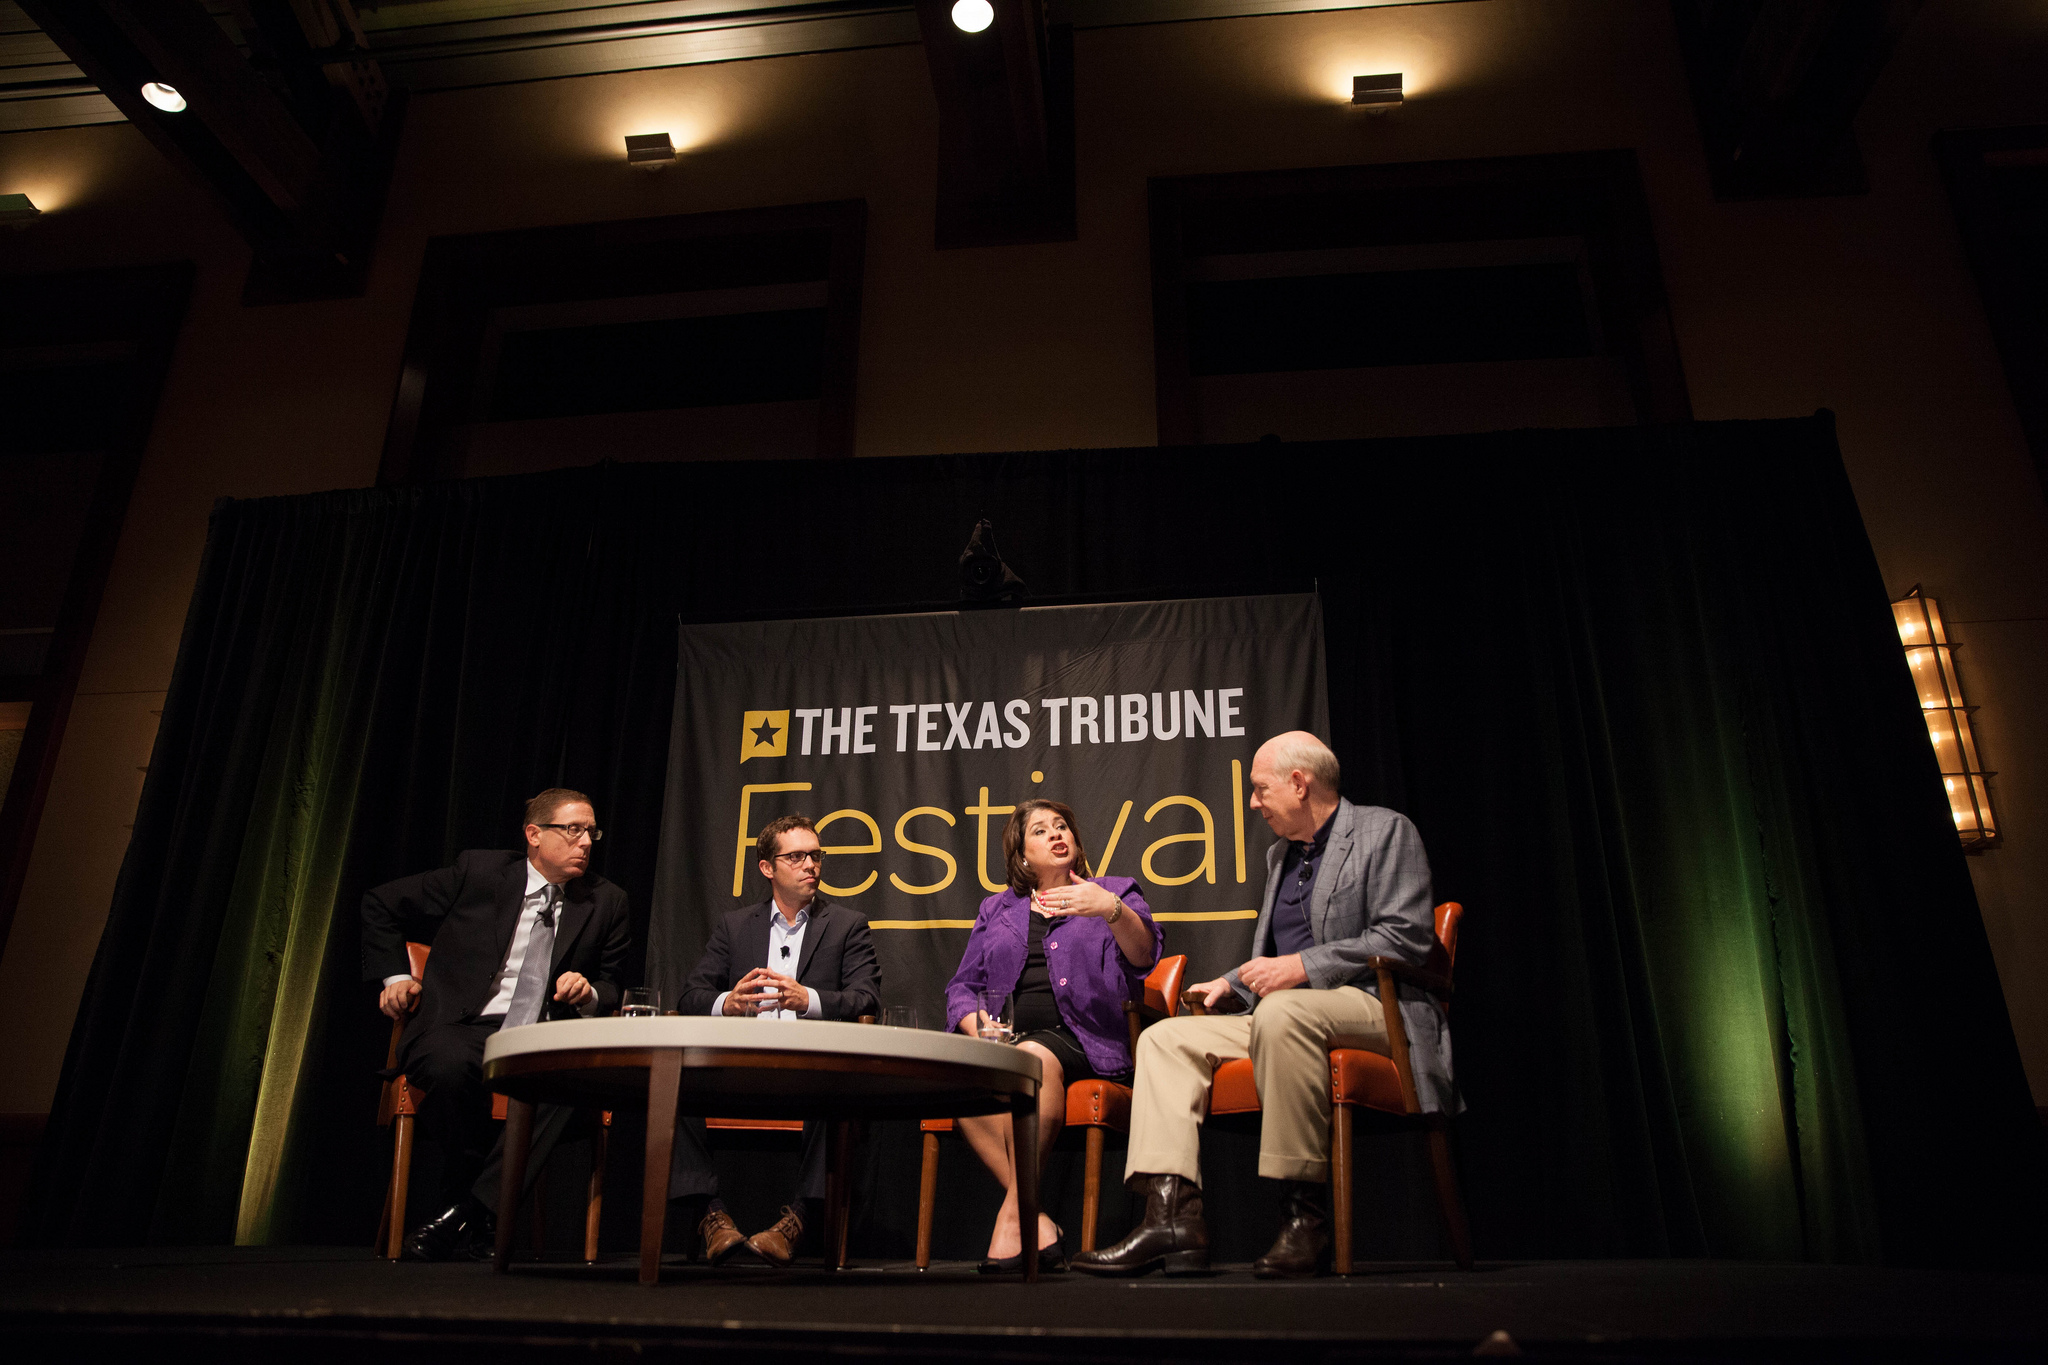 Evan Smith, CEO and Editor-in-Chief of The Texas Tribune, speaks with Texan politicians and thought leaders during the 'Turning Texas Blue' keynote session of the three-day Texas Tribune Festival in 2013.